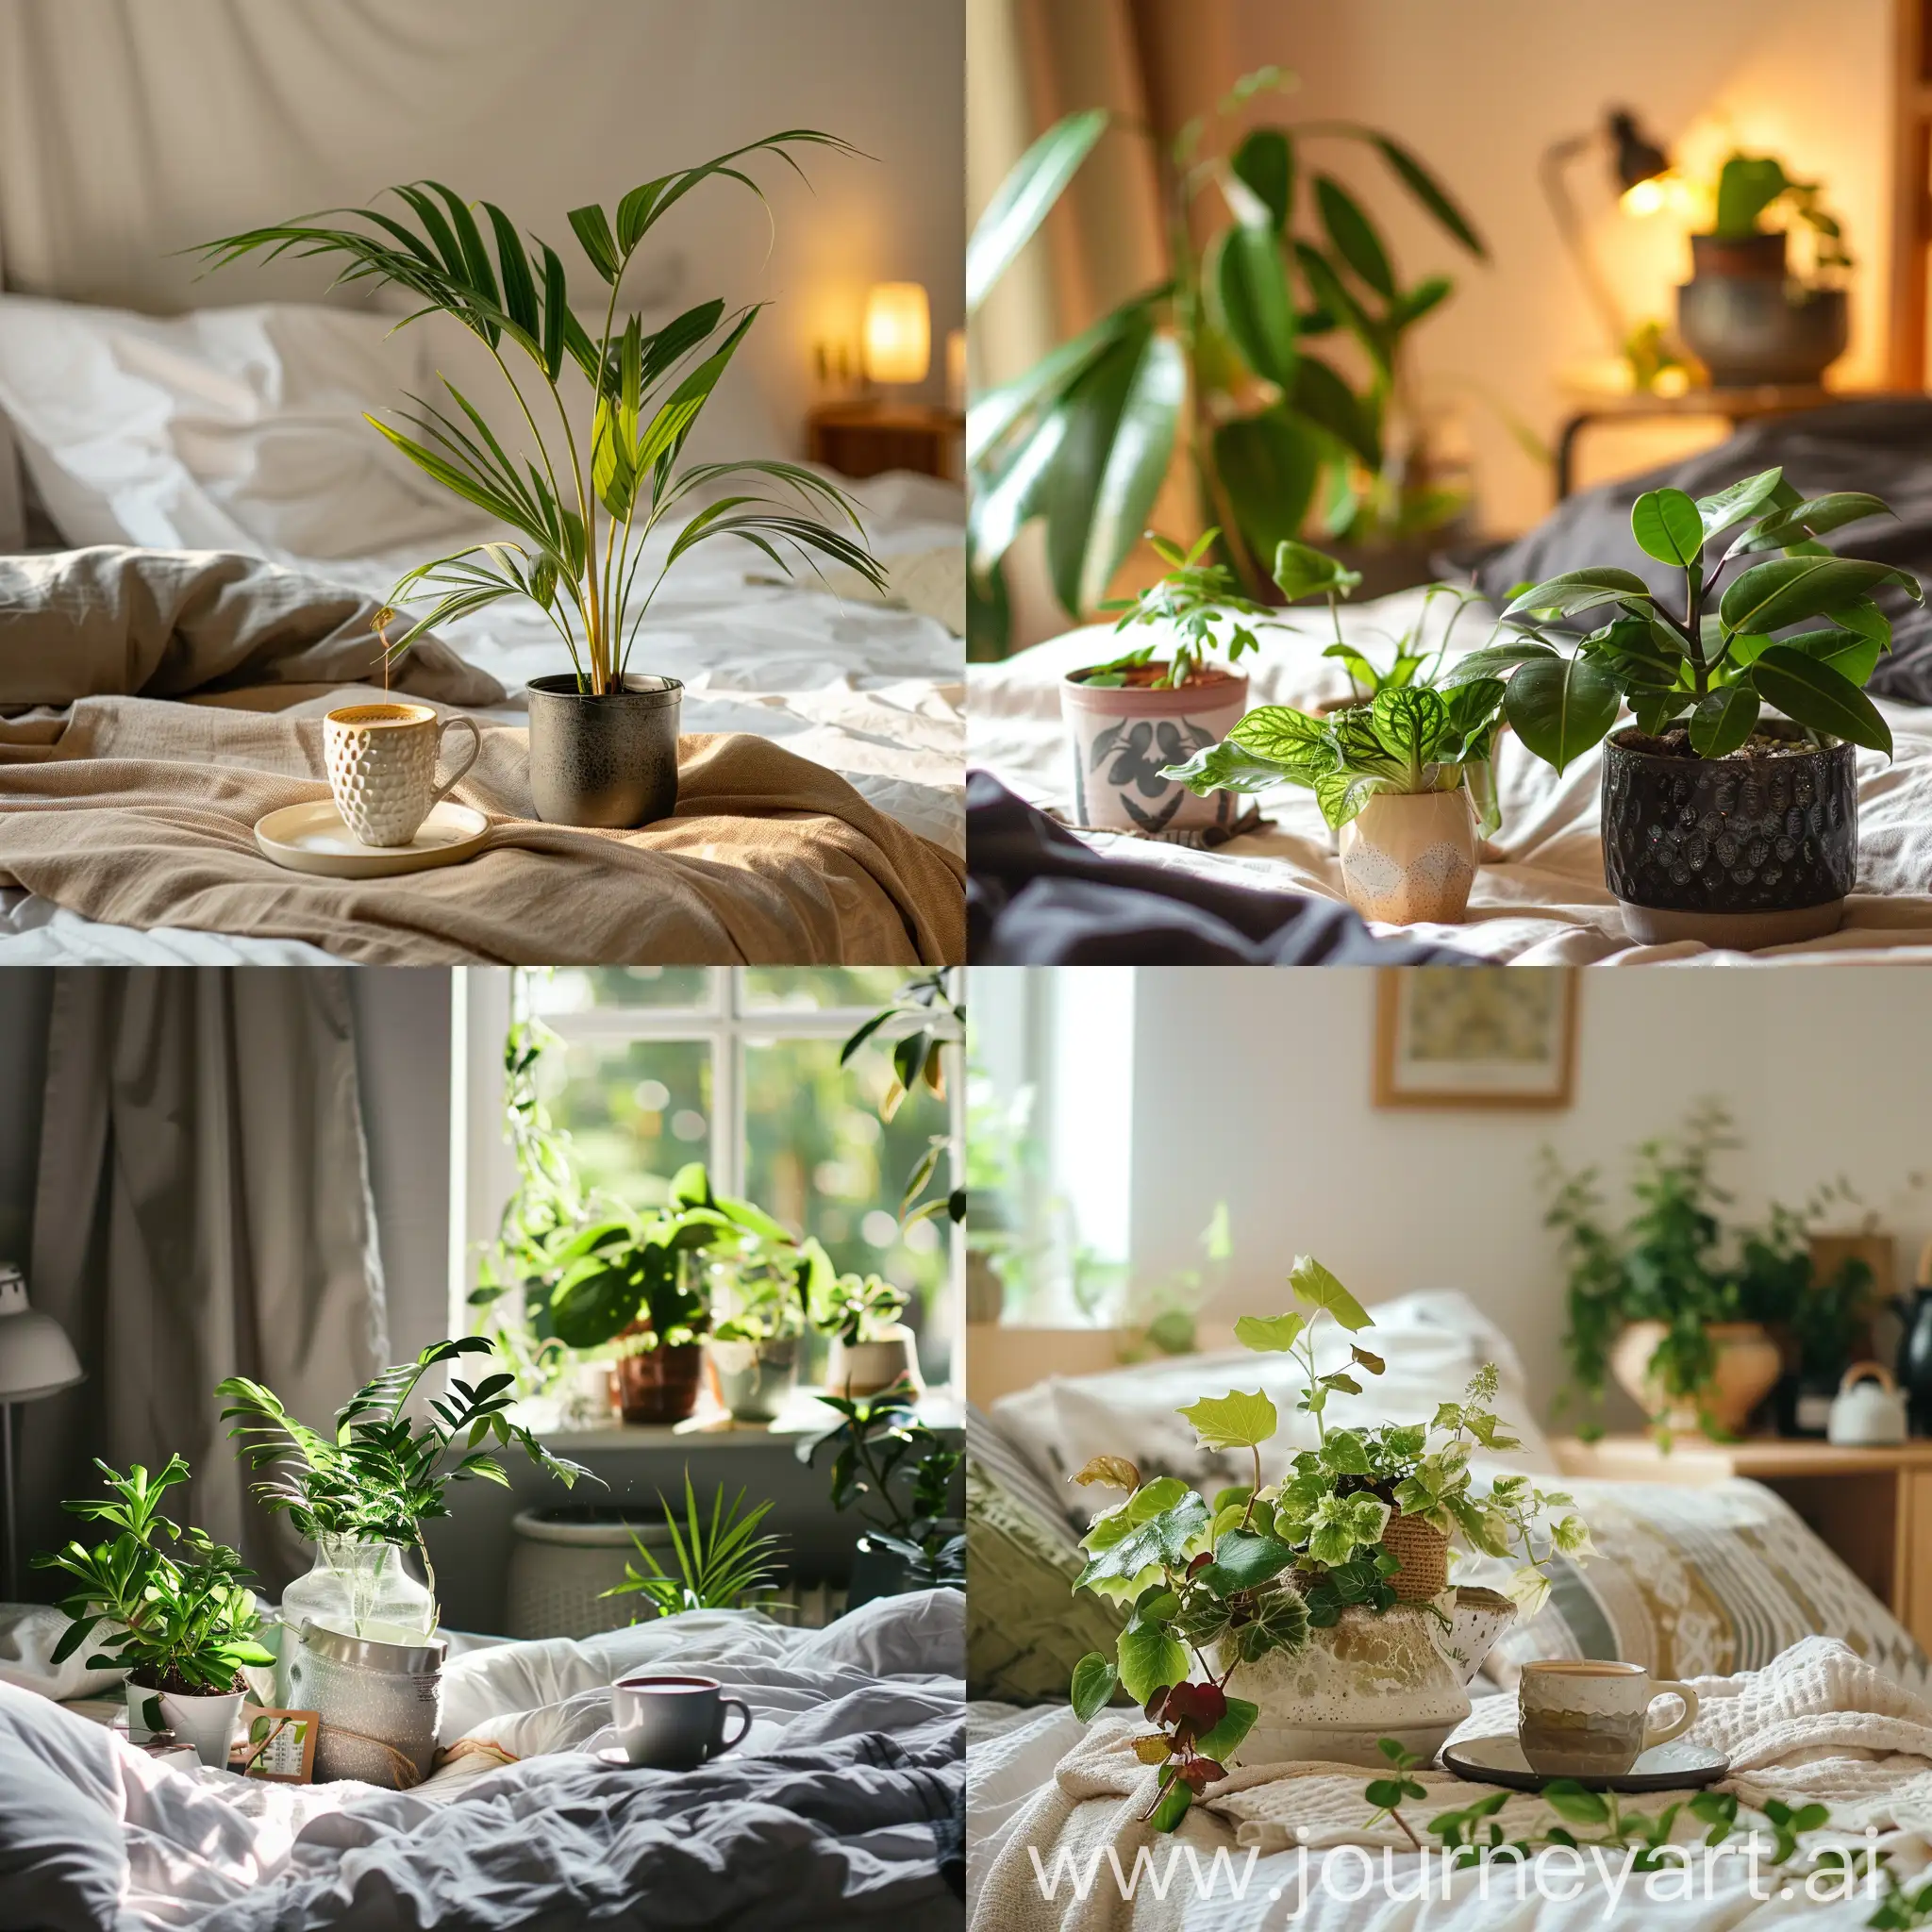 Voucher for 90€ plant shopping, 90 hugs and 90 coffees delivered to your bed